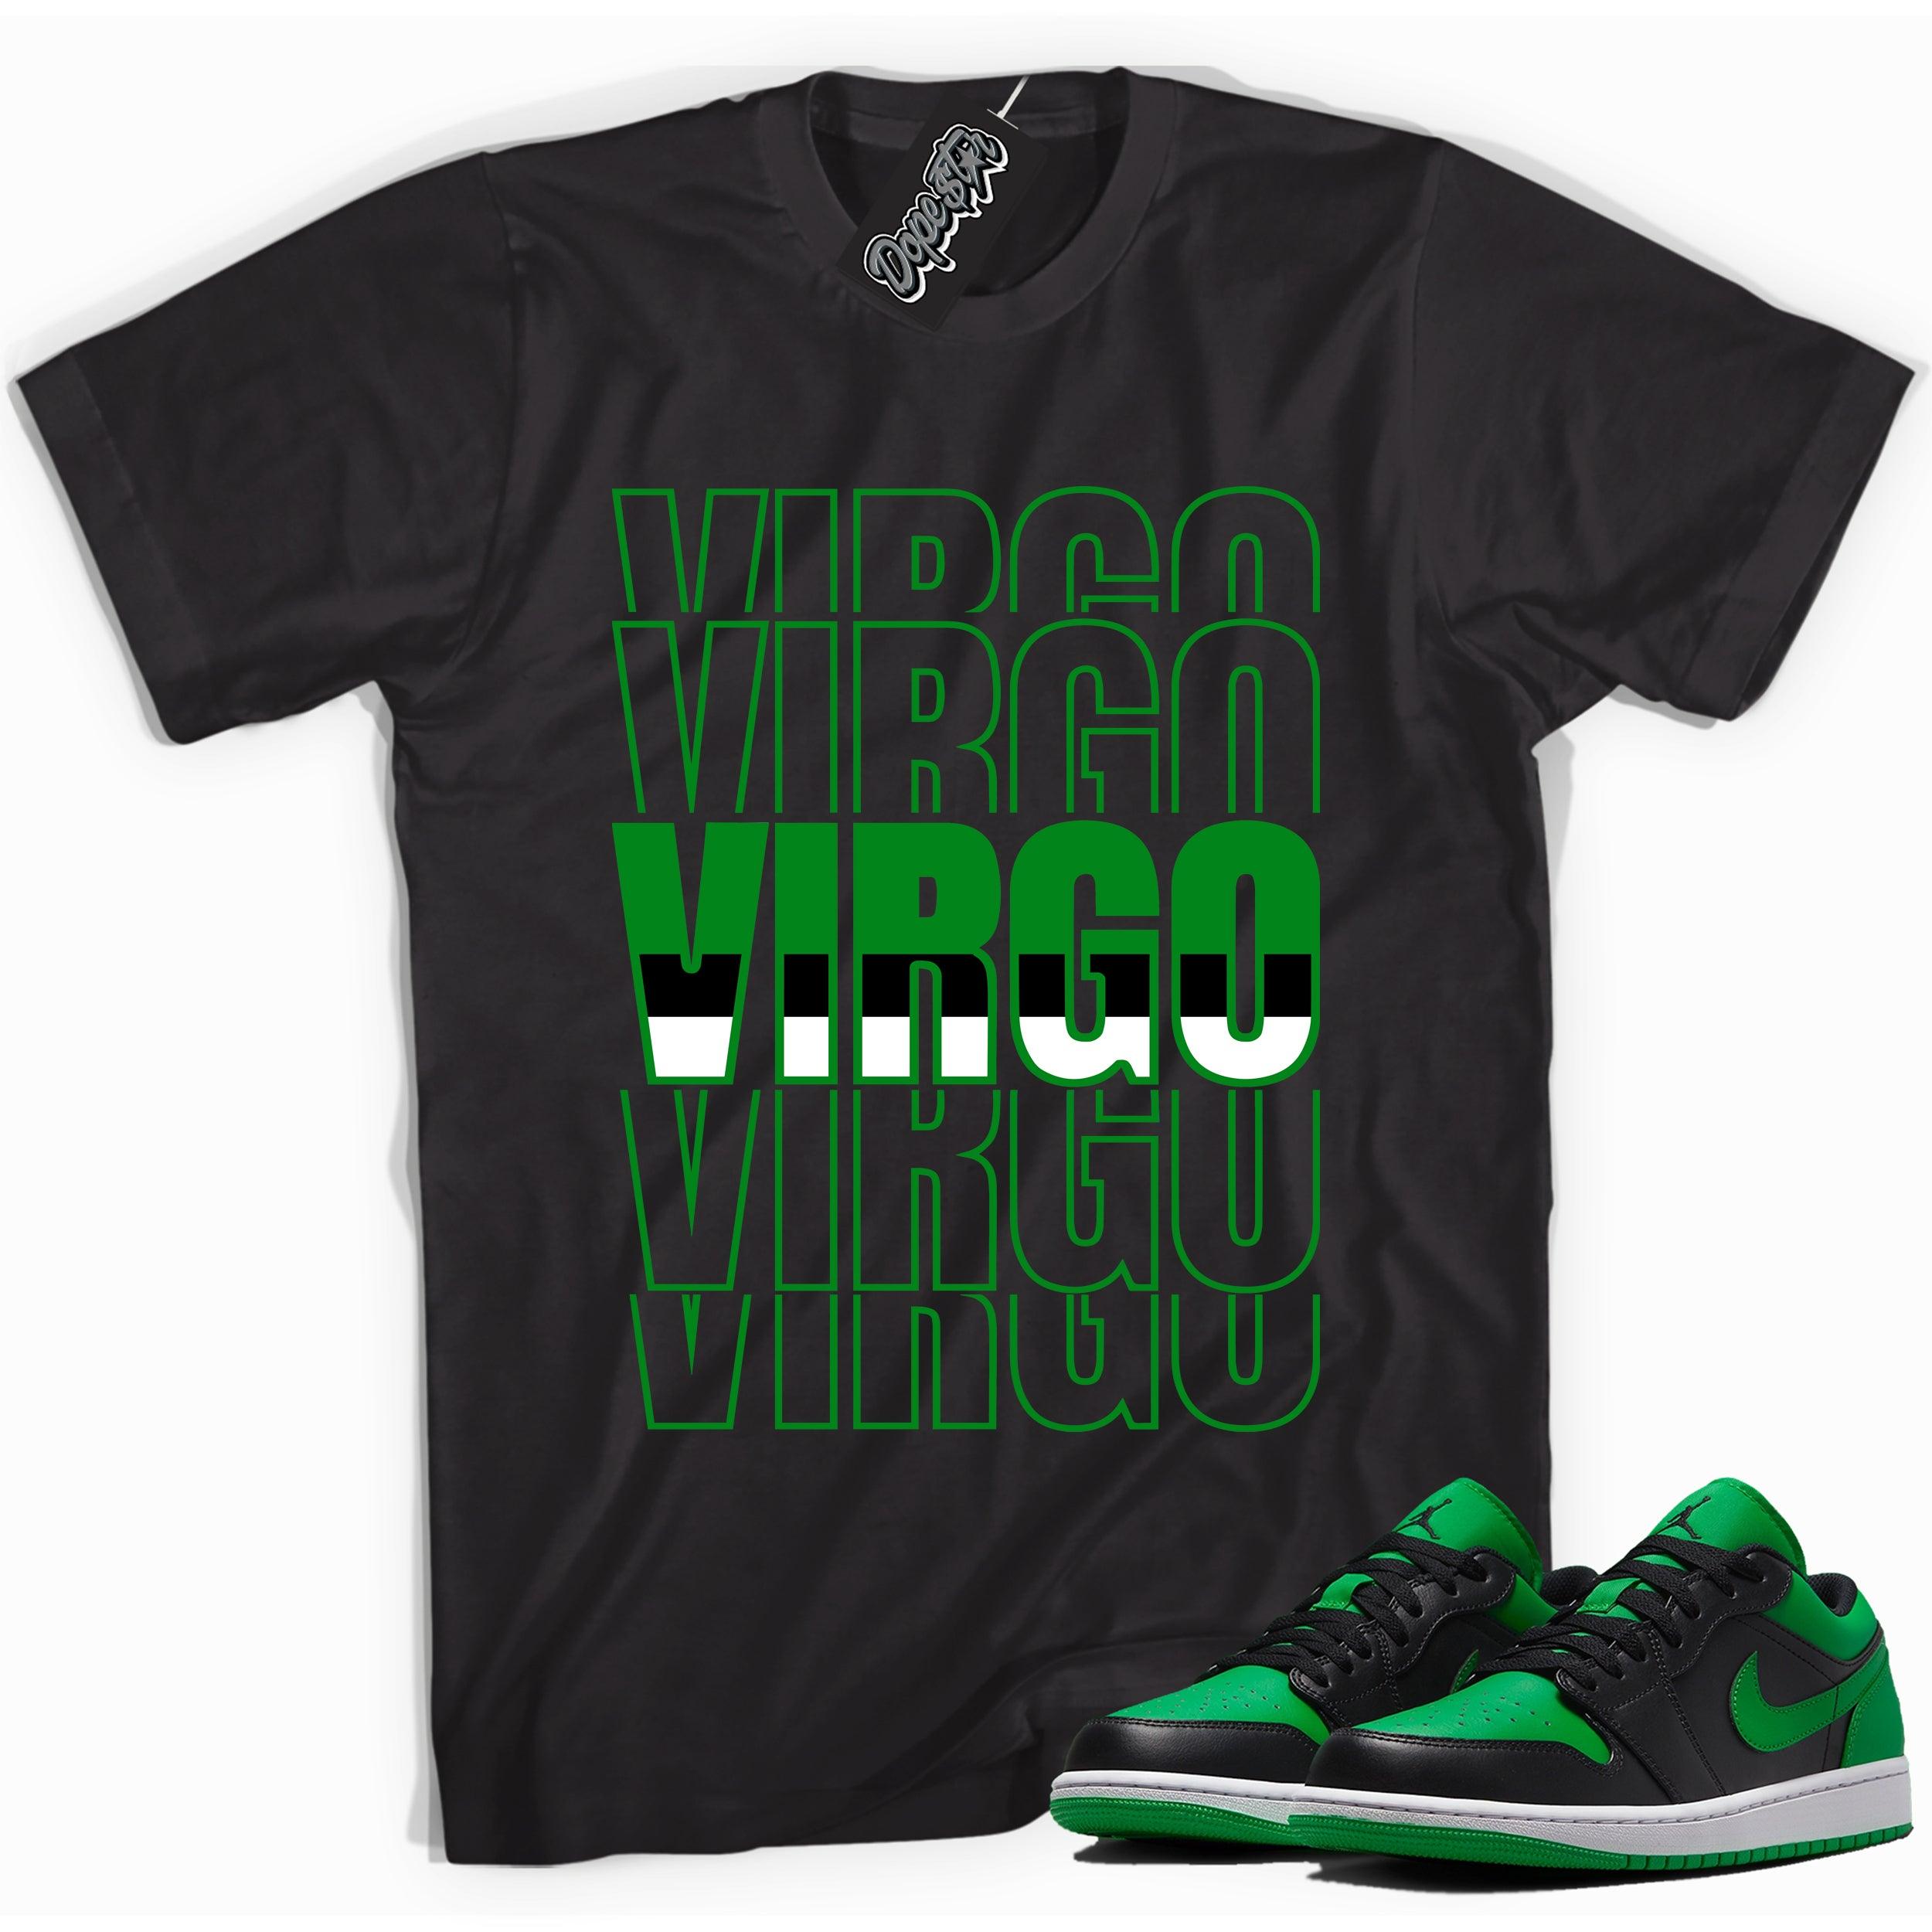 Cool black graphic tee with 'virgo' print, that perfectly matches Air Jordan 1 Low Lucky Green sneakers